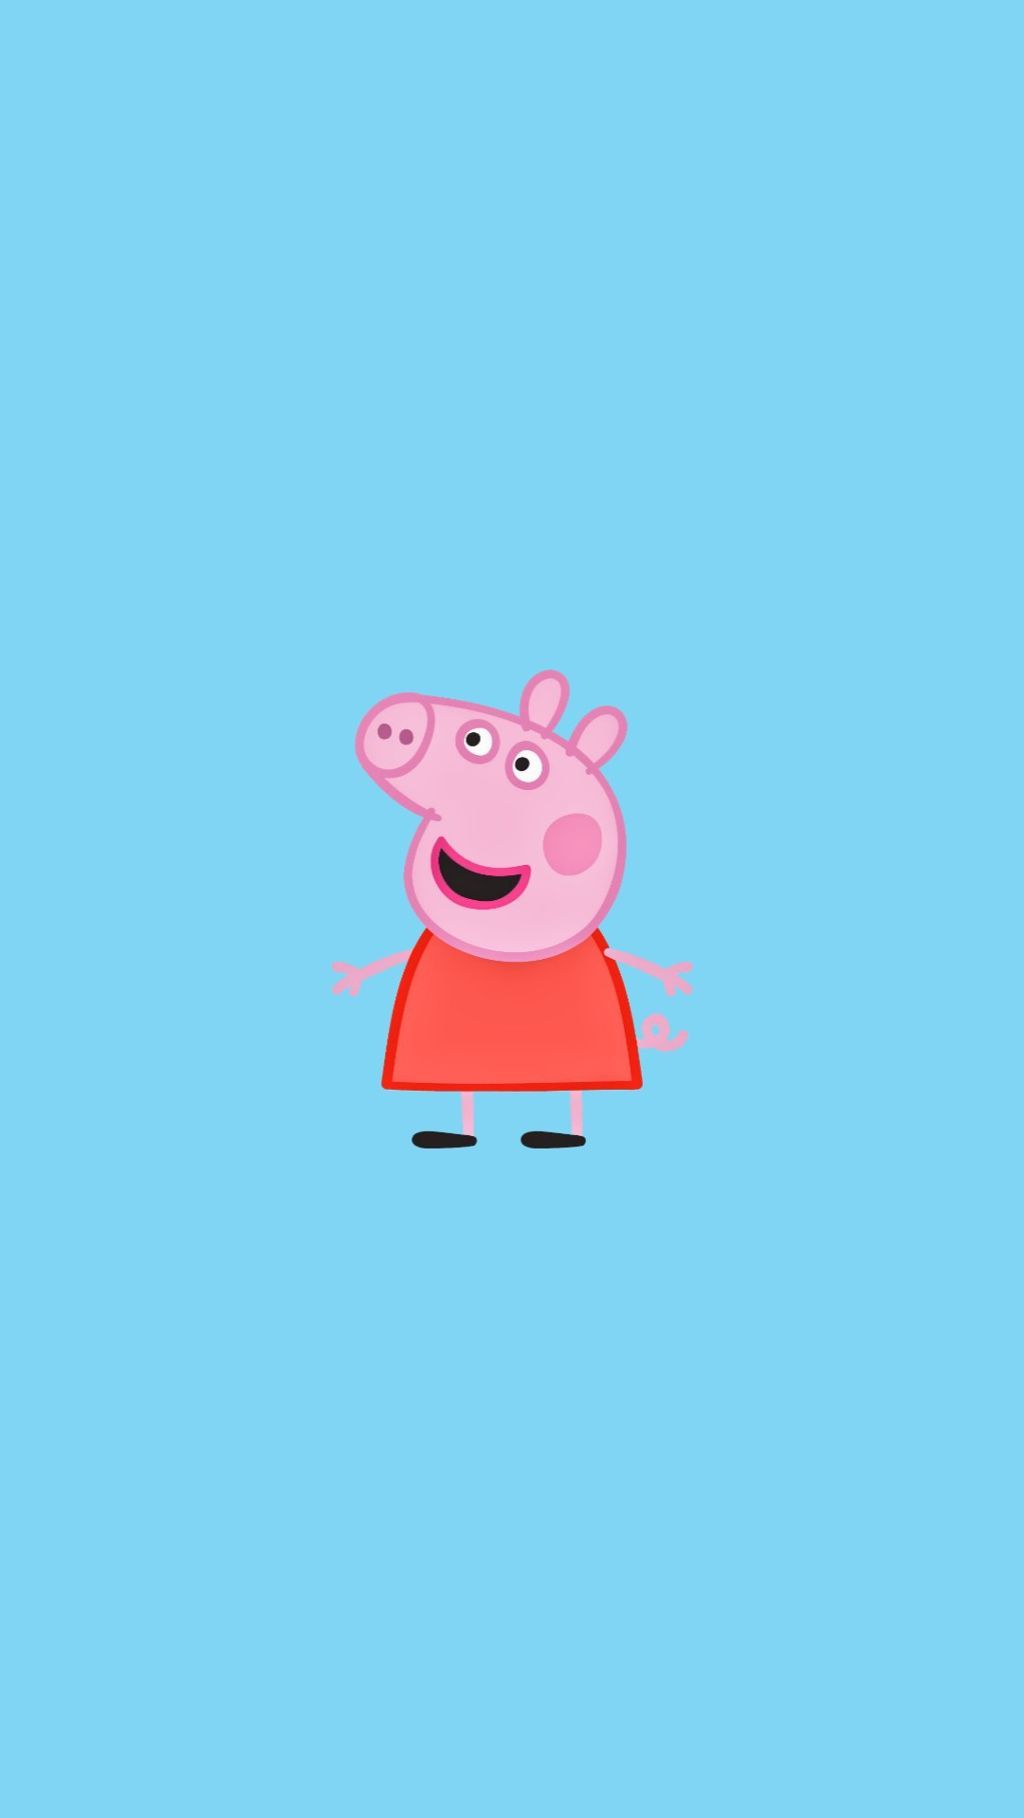 Free download Peppa Pig Home Screen 1182x2560 Wallpaper teahubio [1182x2560] for your Desktop, Mobile & Tablet. Explore Peppa Pig House Wallpaper. Guinea Pig Wallpaper, Cute Pig Wallpaper, Pig Wallpaper